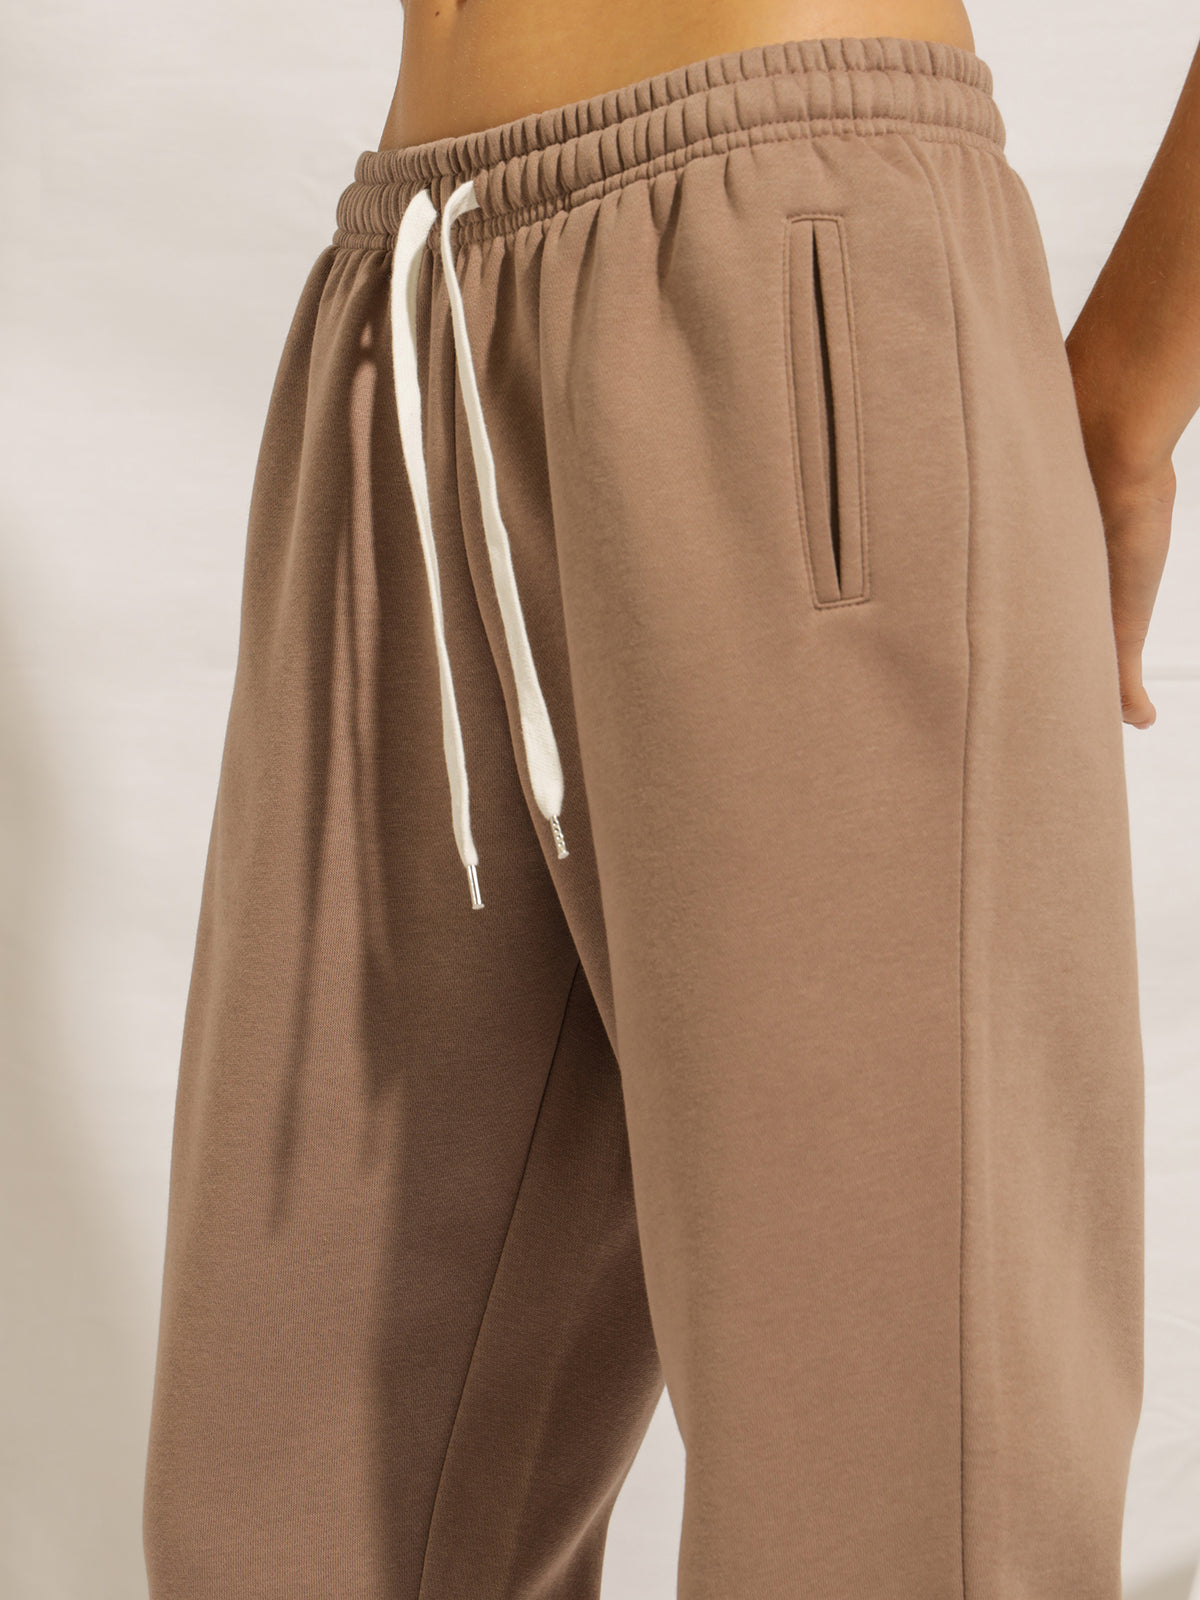 Carter Classic Trackpants in Carob Brown